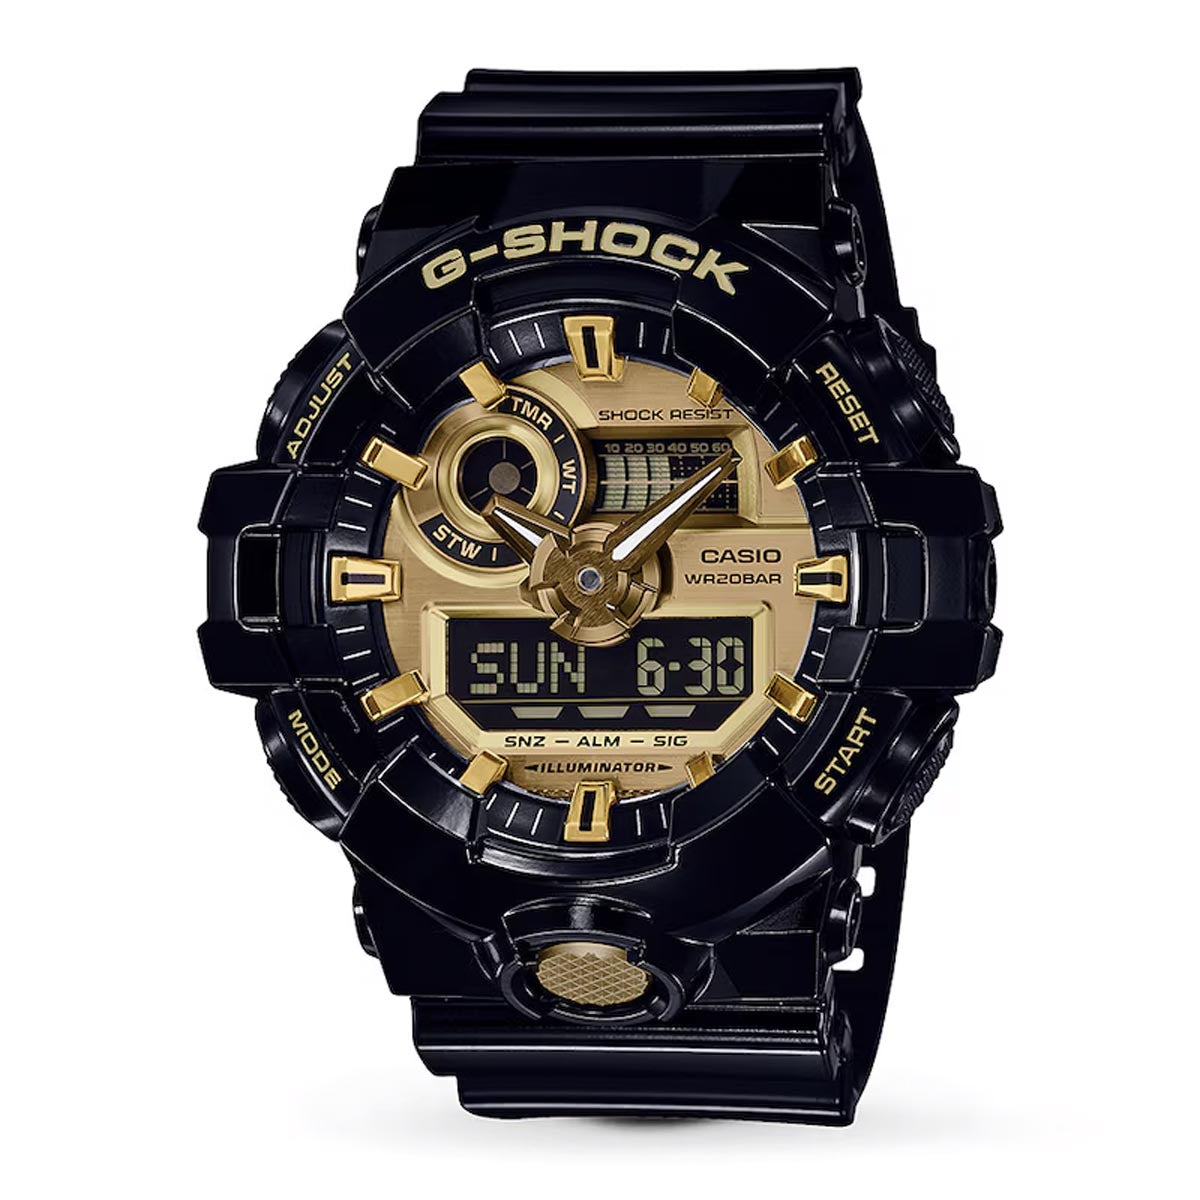 G-Shock GA-700 Series Mens Watch with Gold Toned Dial and Black Strap (quartz movement)